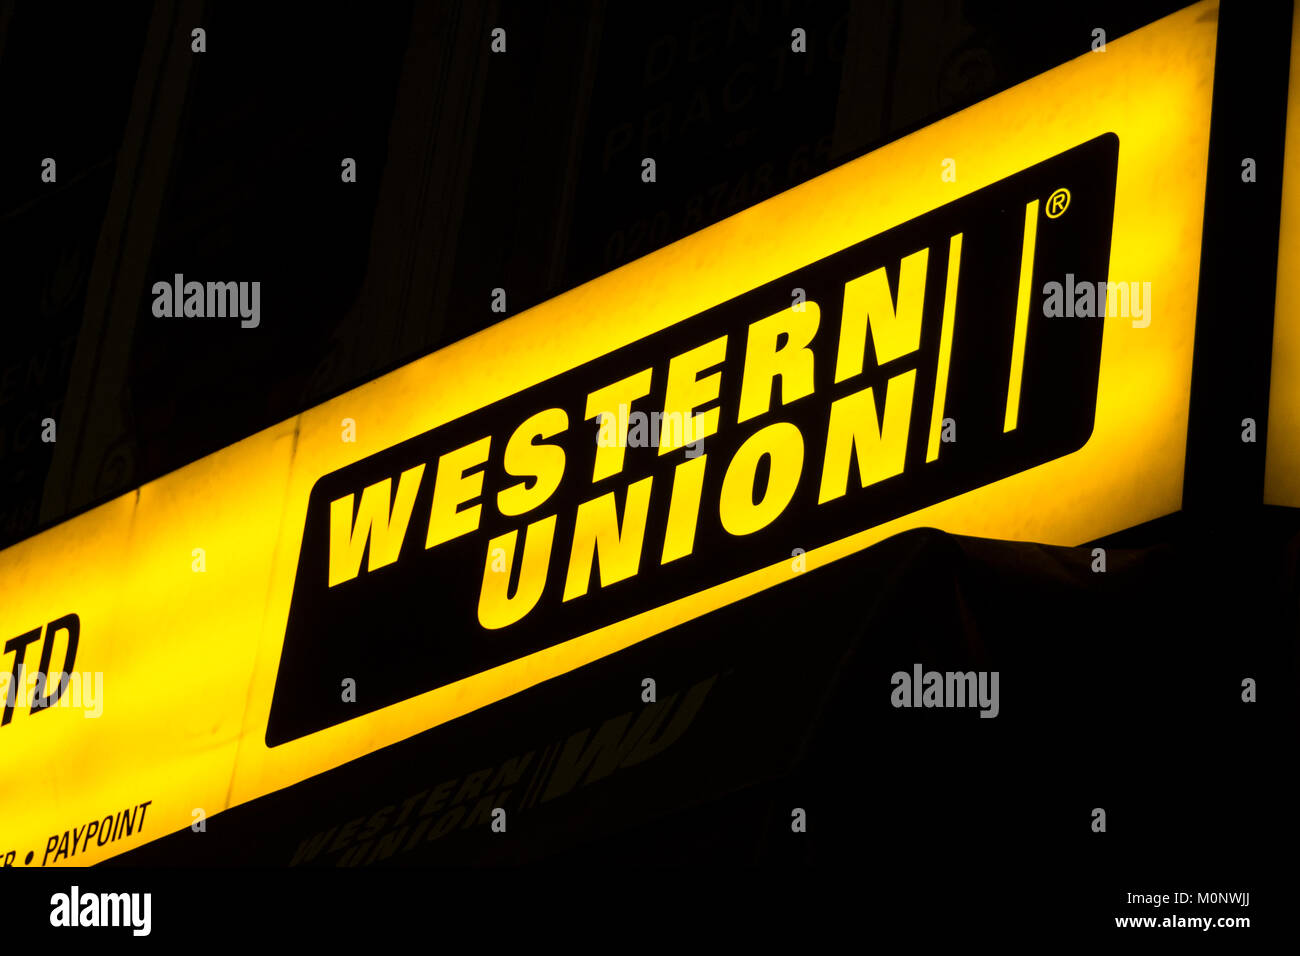 Western Union Money Transfer And Paypoint Signage And Logo At